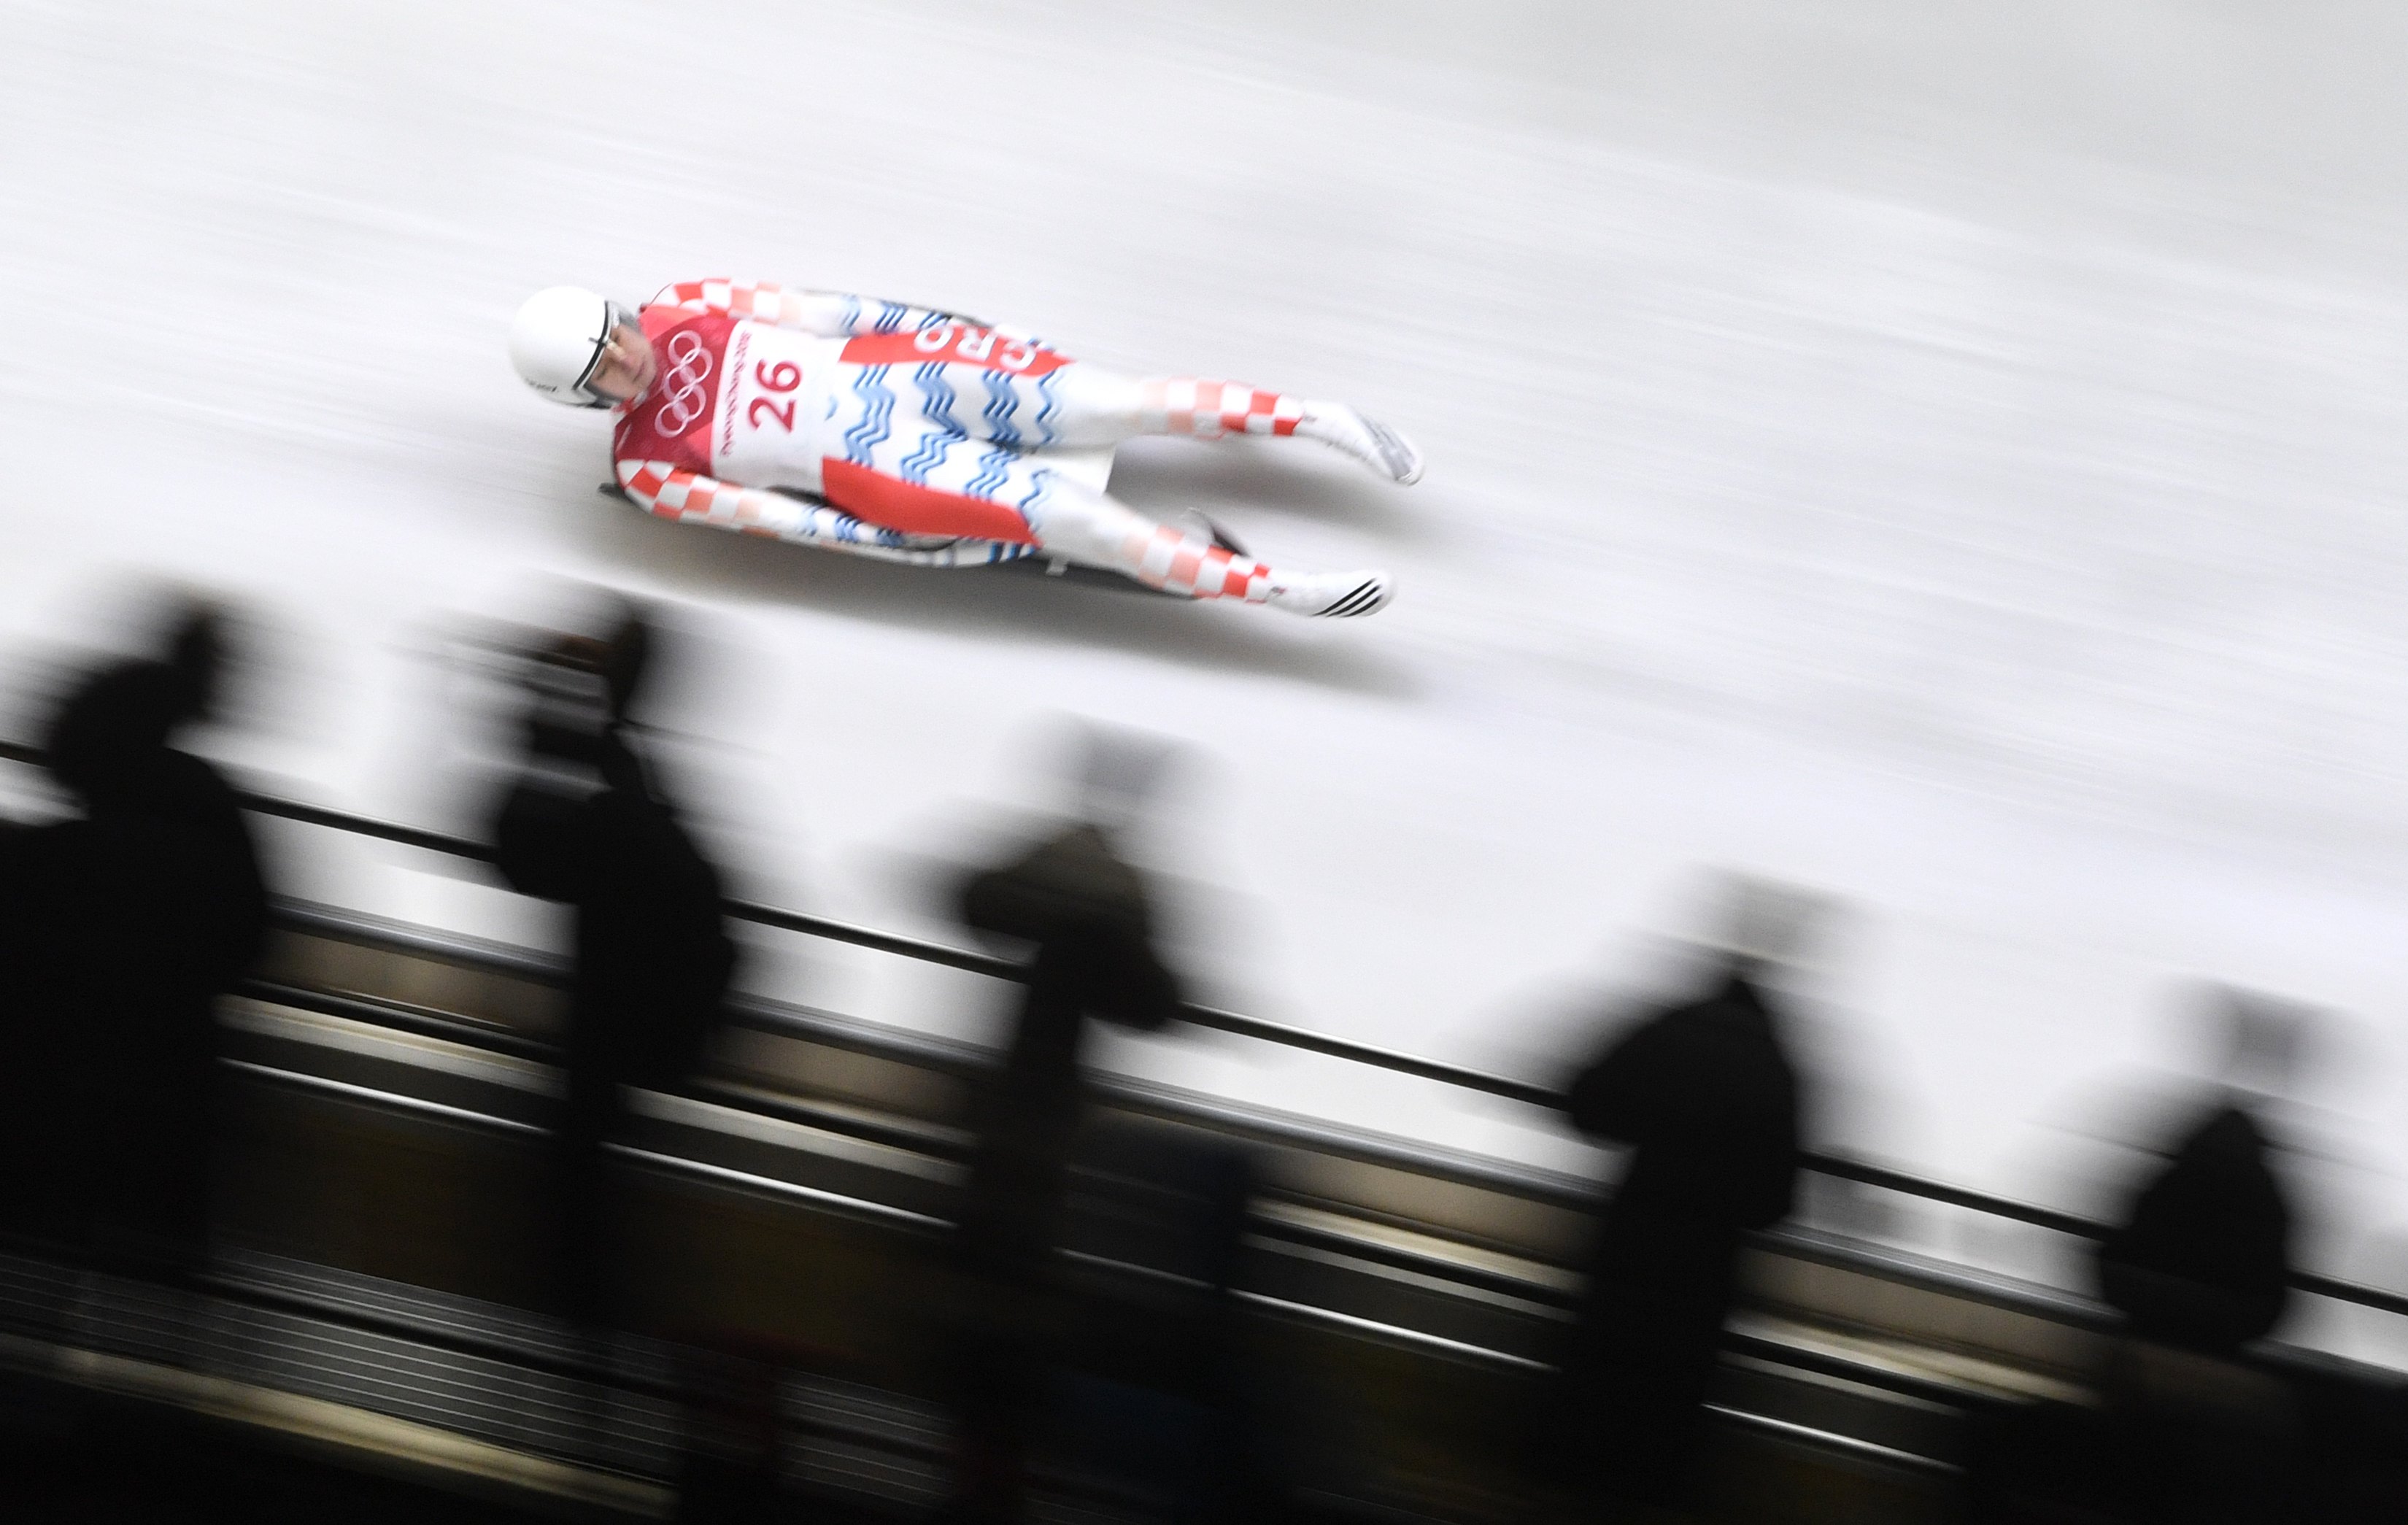 epa06517567 Daria Obratov of Croatia in action during the Women's Luge Singles competition at the Olympic Sliding Centre during the PyeongChang 2018 Olympic Games, South Korea, 12 February 2018.  EPA/VASSIL DONEV